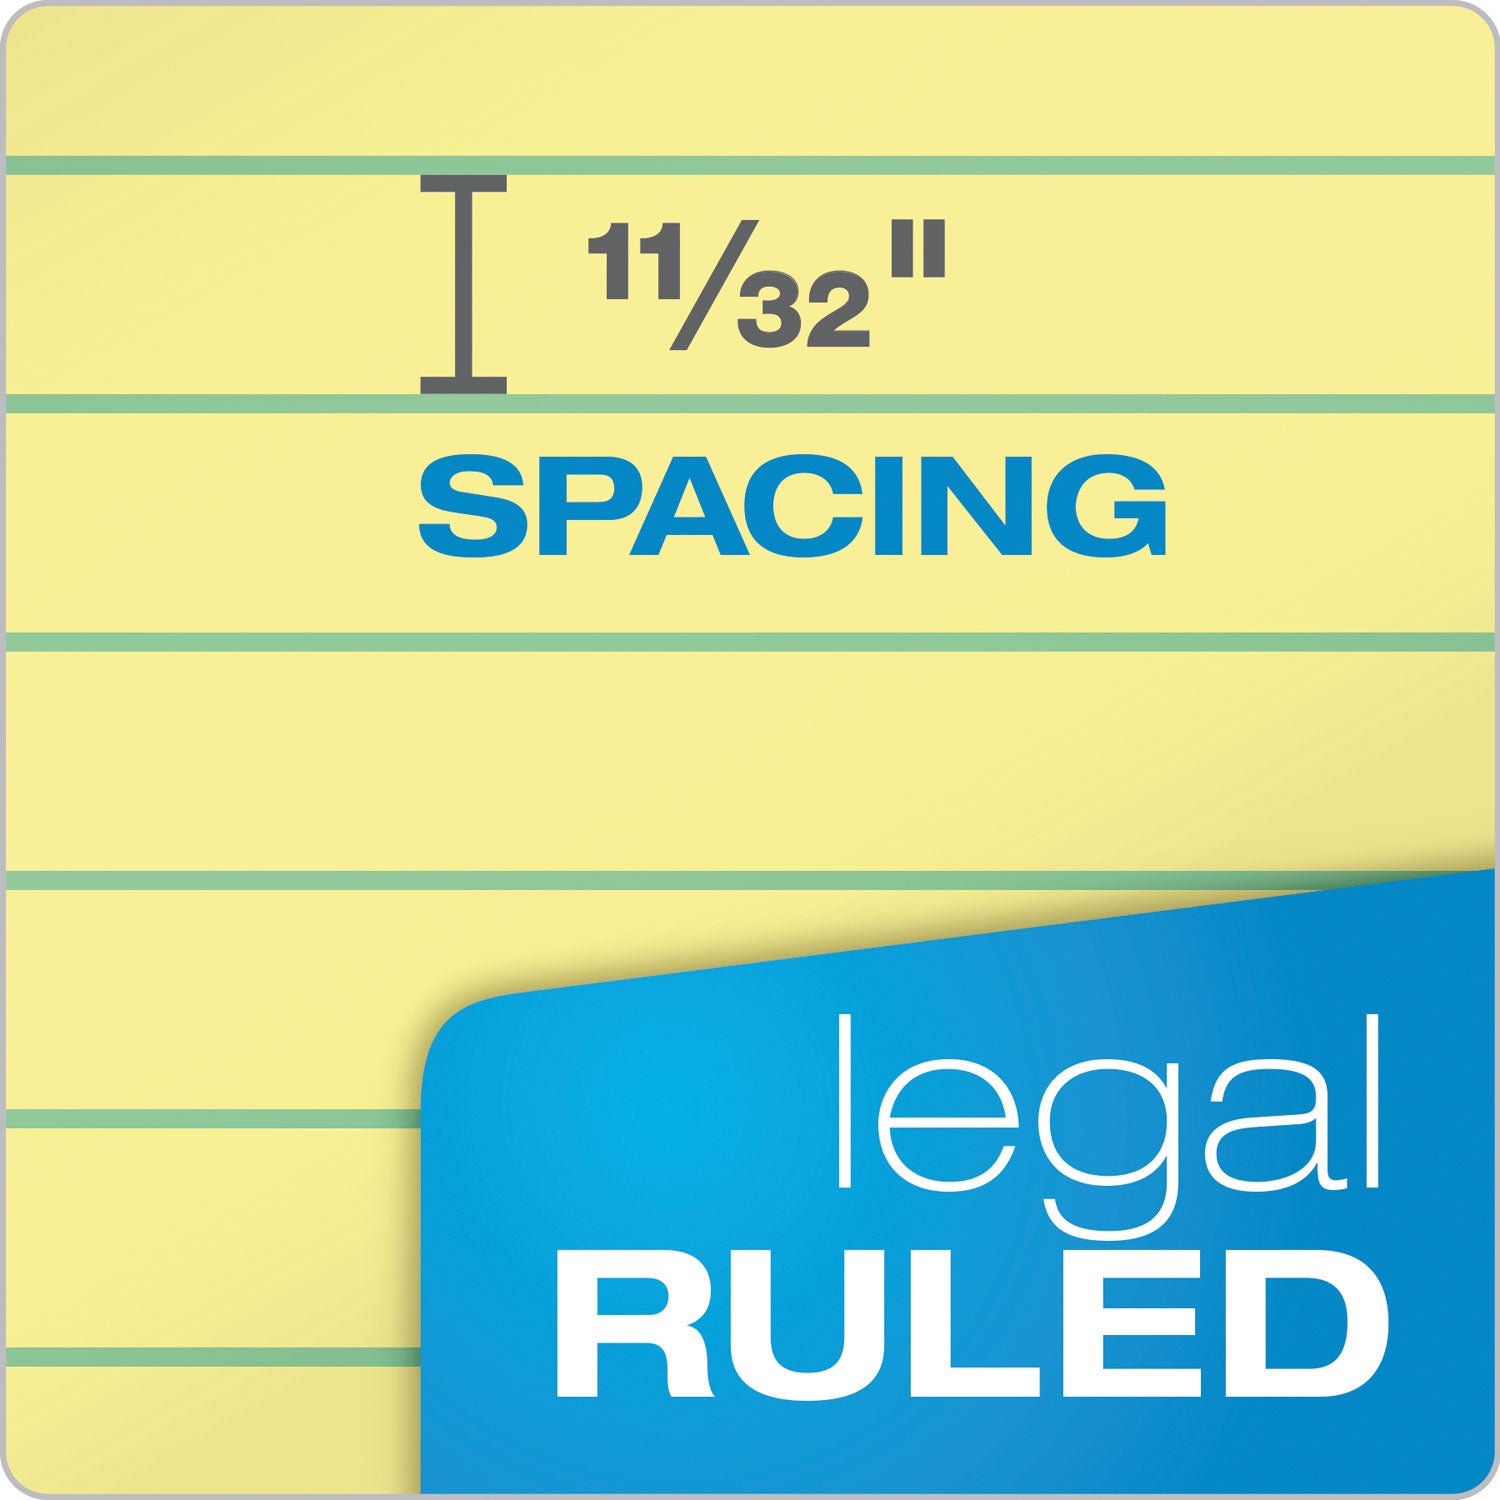 The Legal Pad" Ruled Perforated Pads, Wide/Legal Rule, 50 Canary-Yellow 8.5 x 11 Sheets, 3/Pack - 